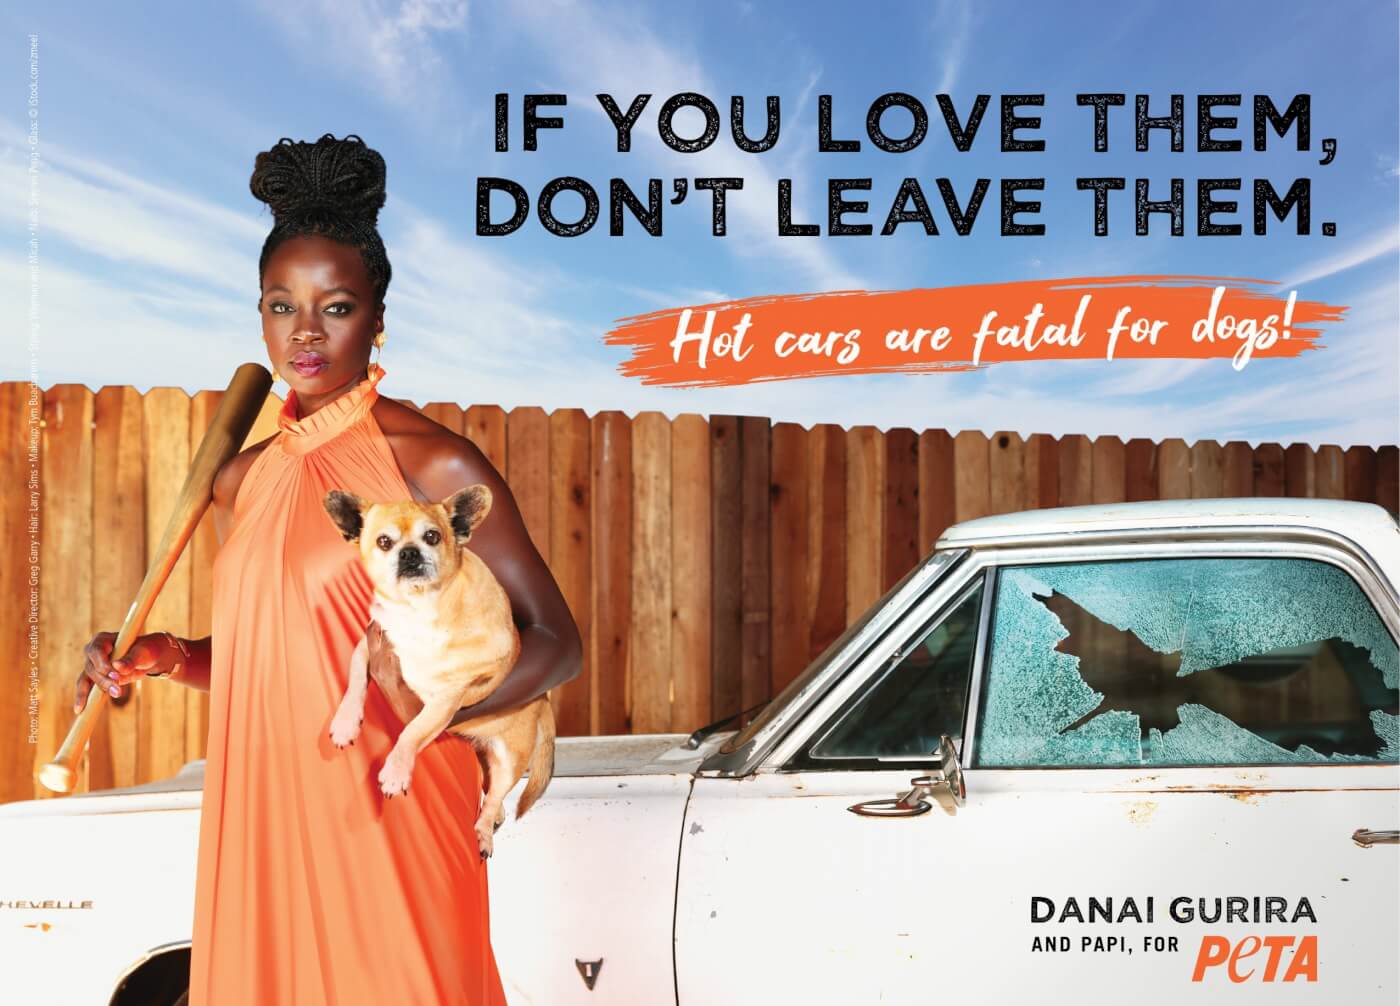 Danai Gurira holds a baseball bat and a dog in front of a car with a broken window